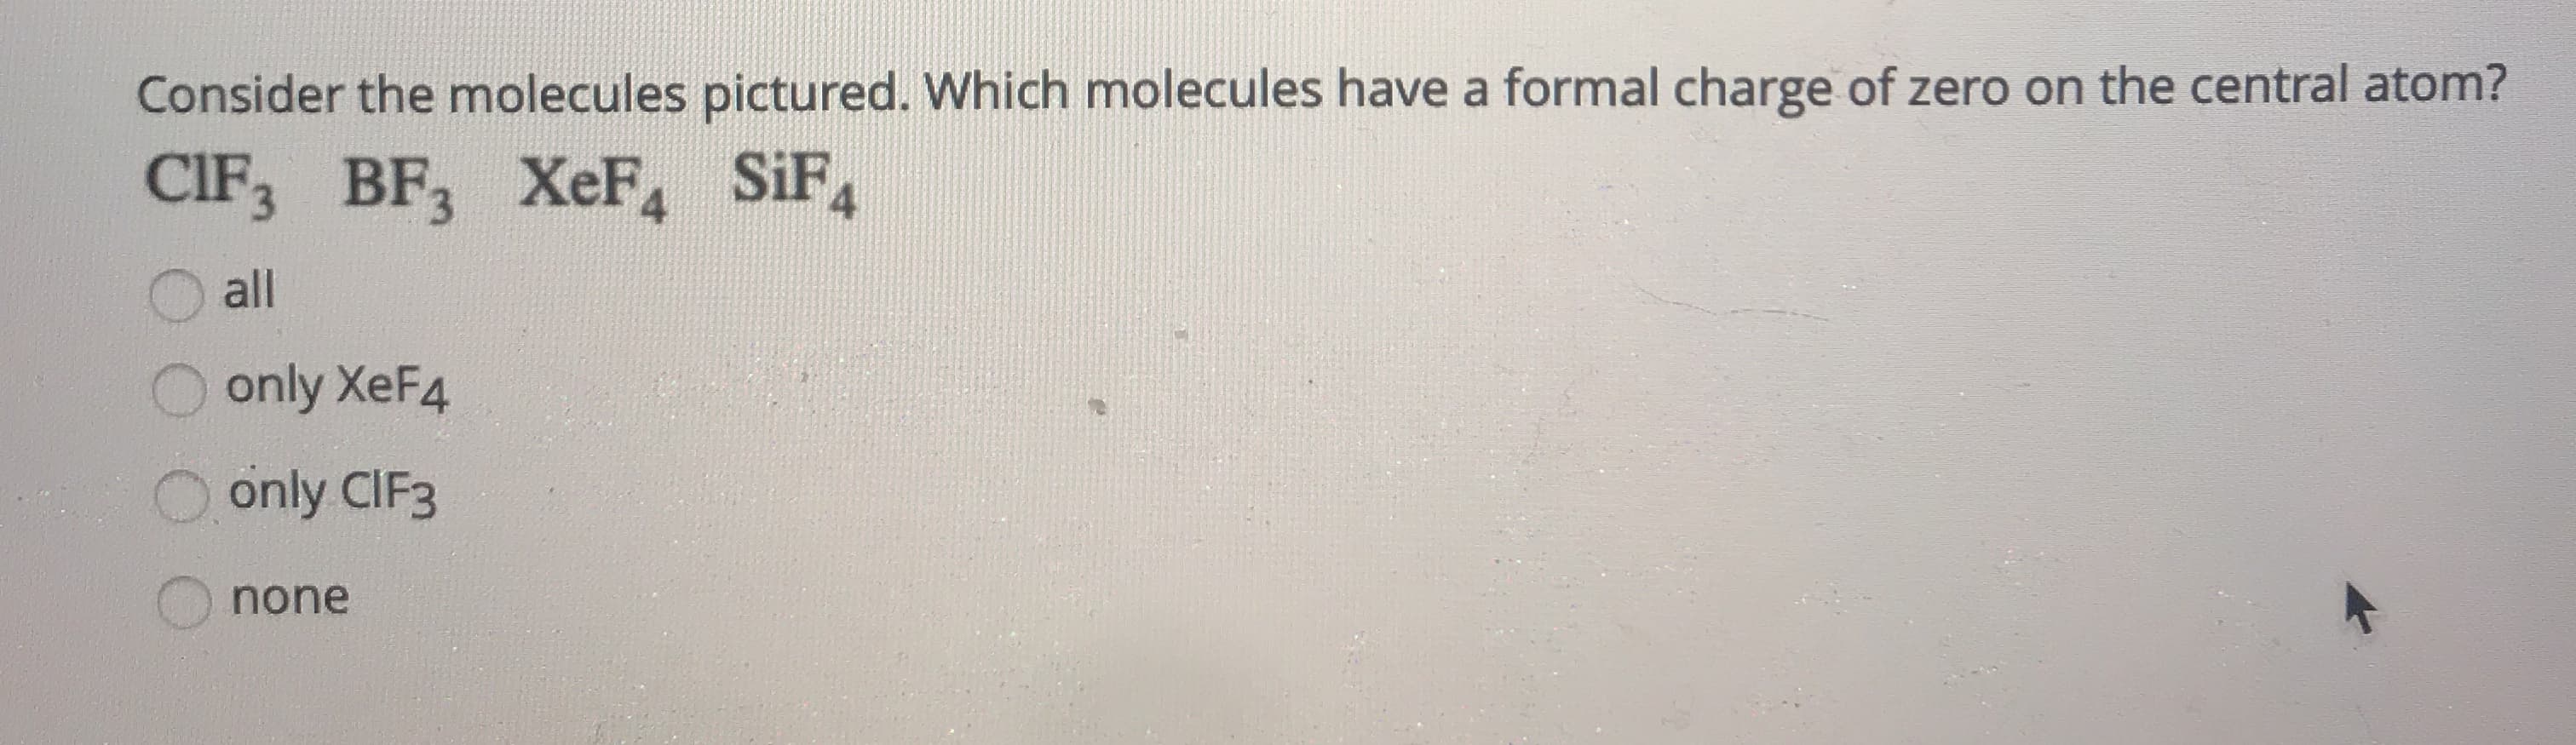 Consider the molecules pictured. Which molecules have a formal charge of zero on the central atom?
CIF3 BF3 XeF, SiF
4
all
O only XeF4
O only CIF3
none
